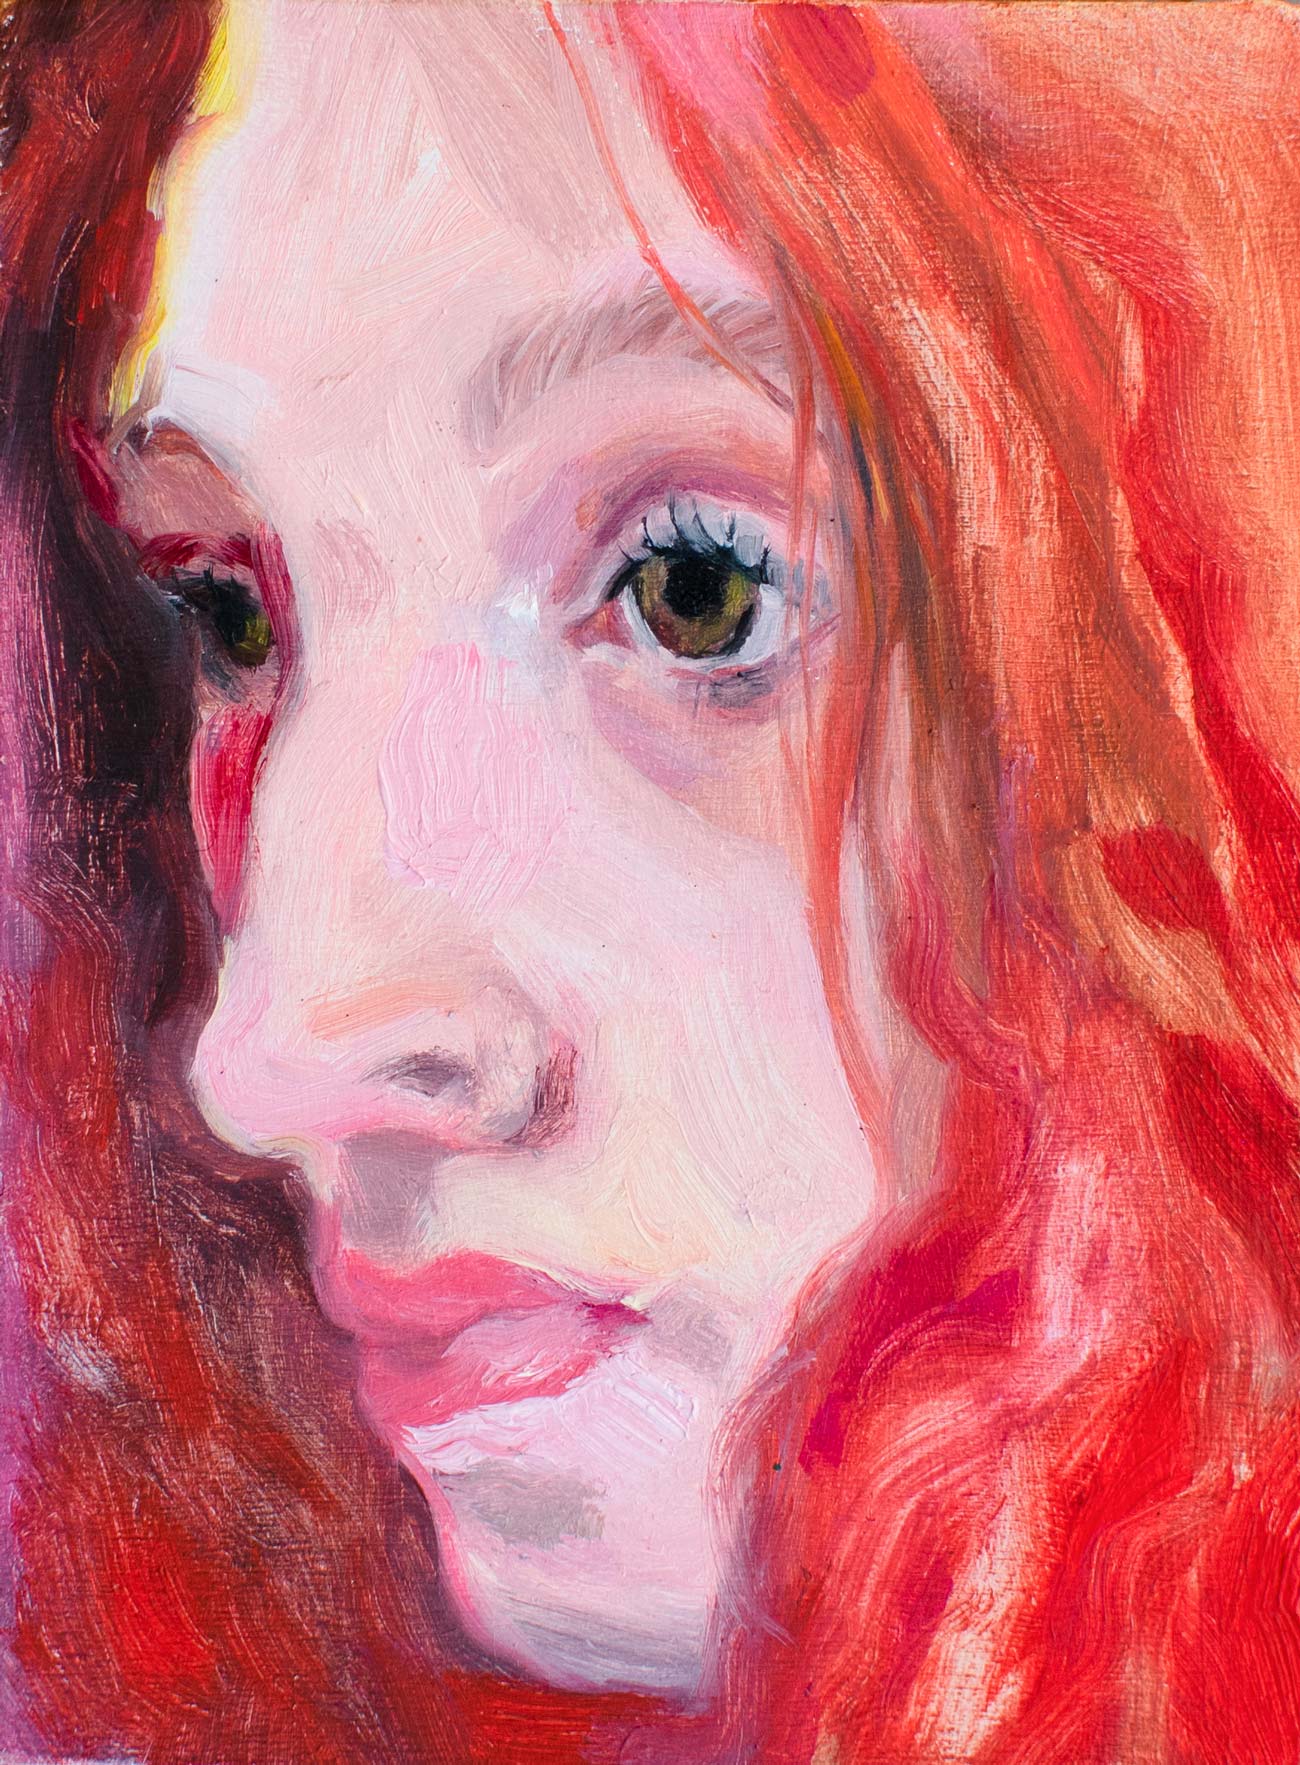 Oil painting portrait of a woman's face with red hair